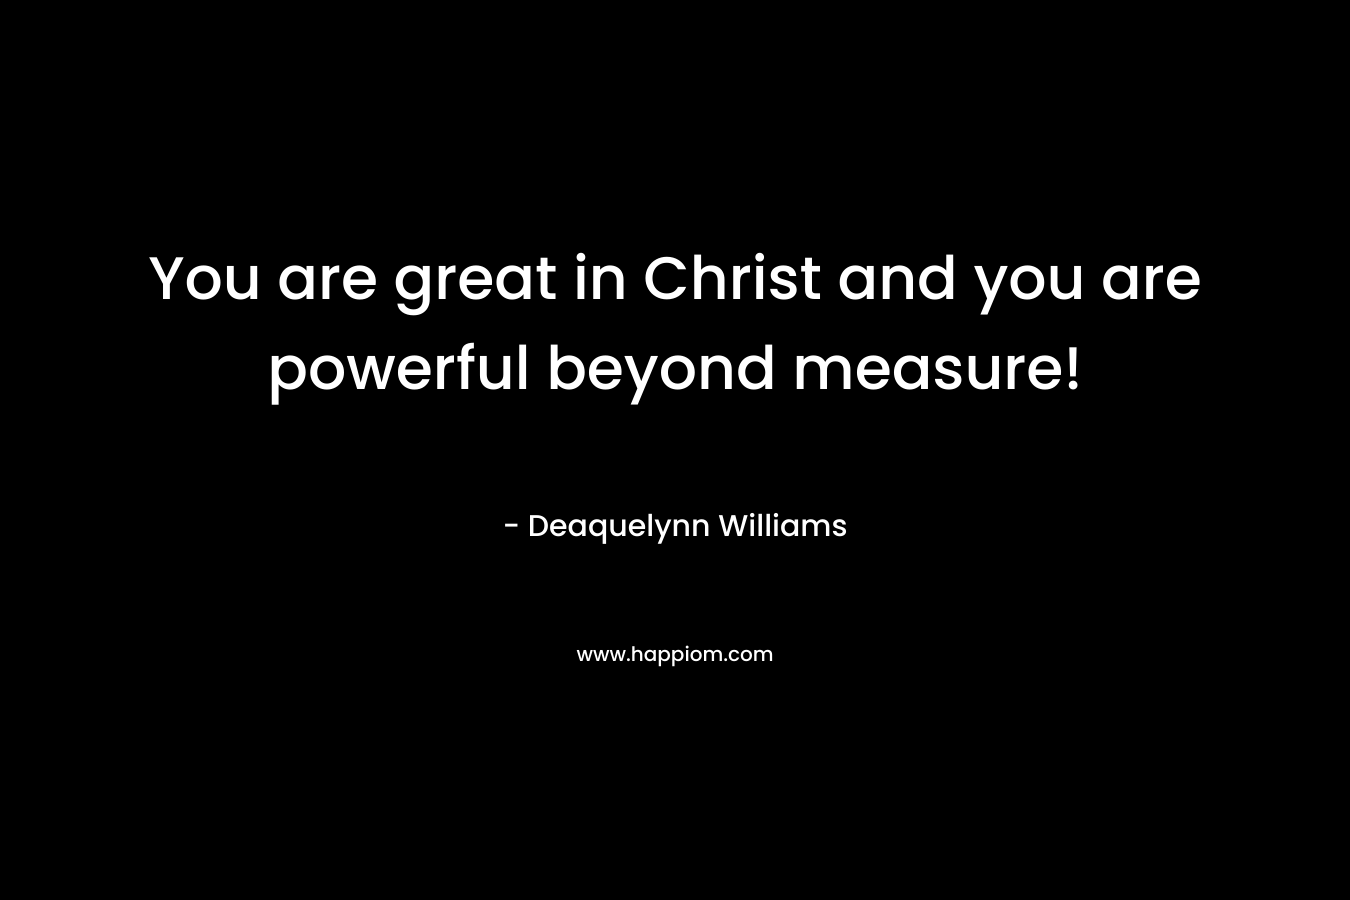 You are great in Christ and you are powerful beyond measure!